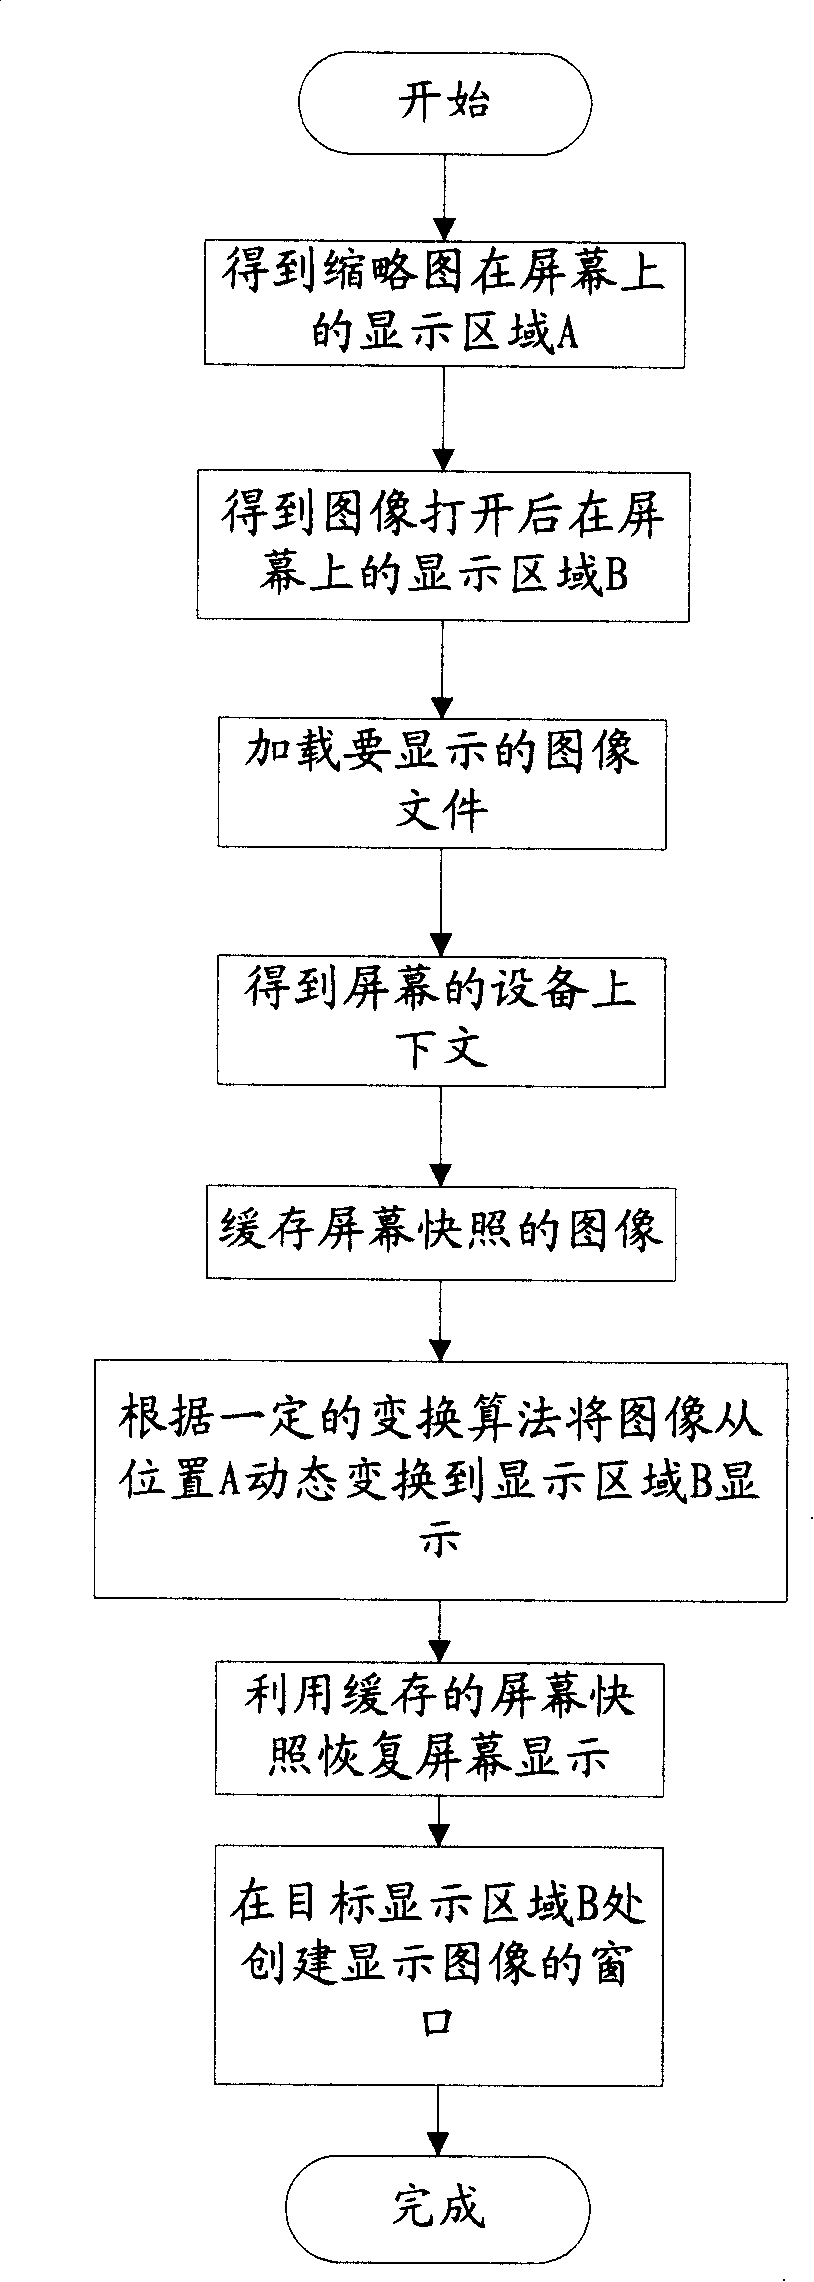 Method and device for opening and closing picture-browsing window